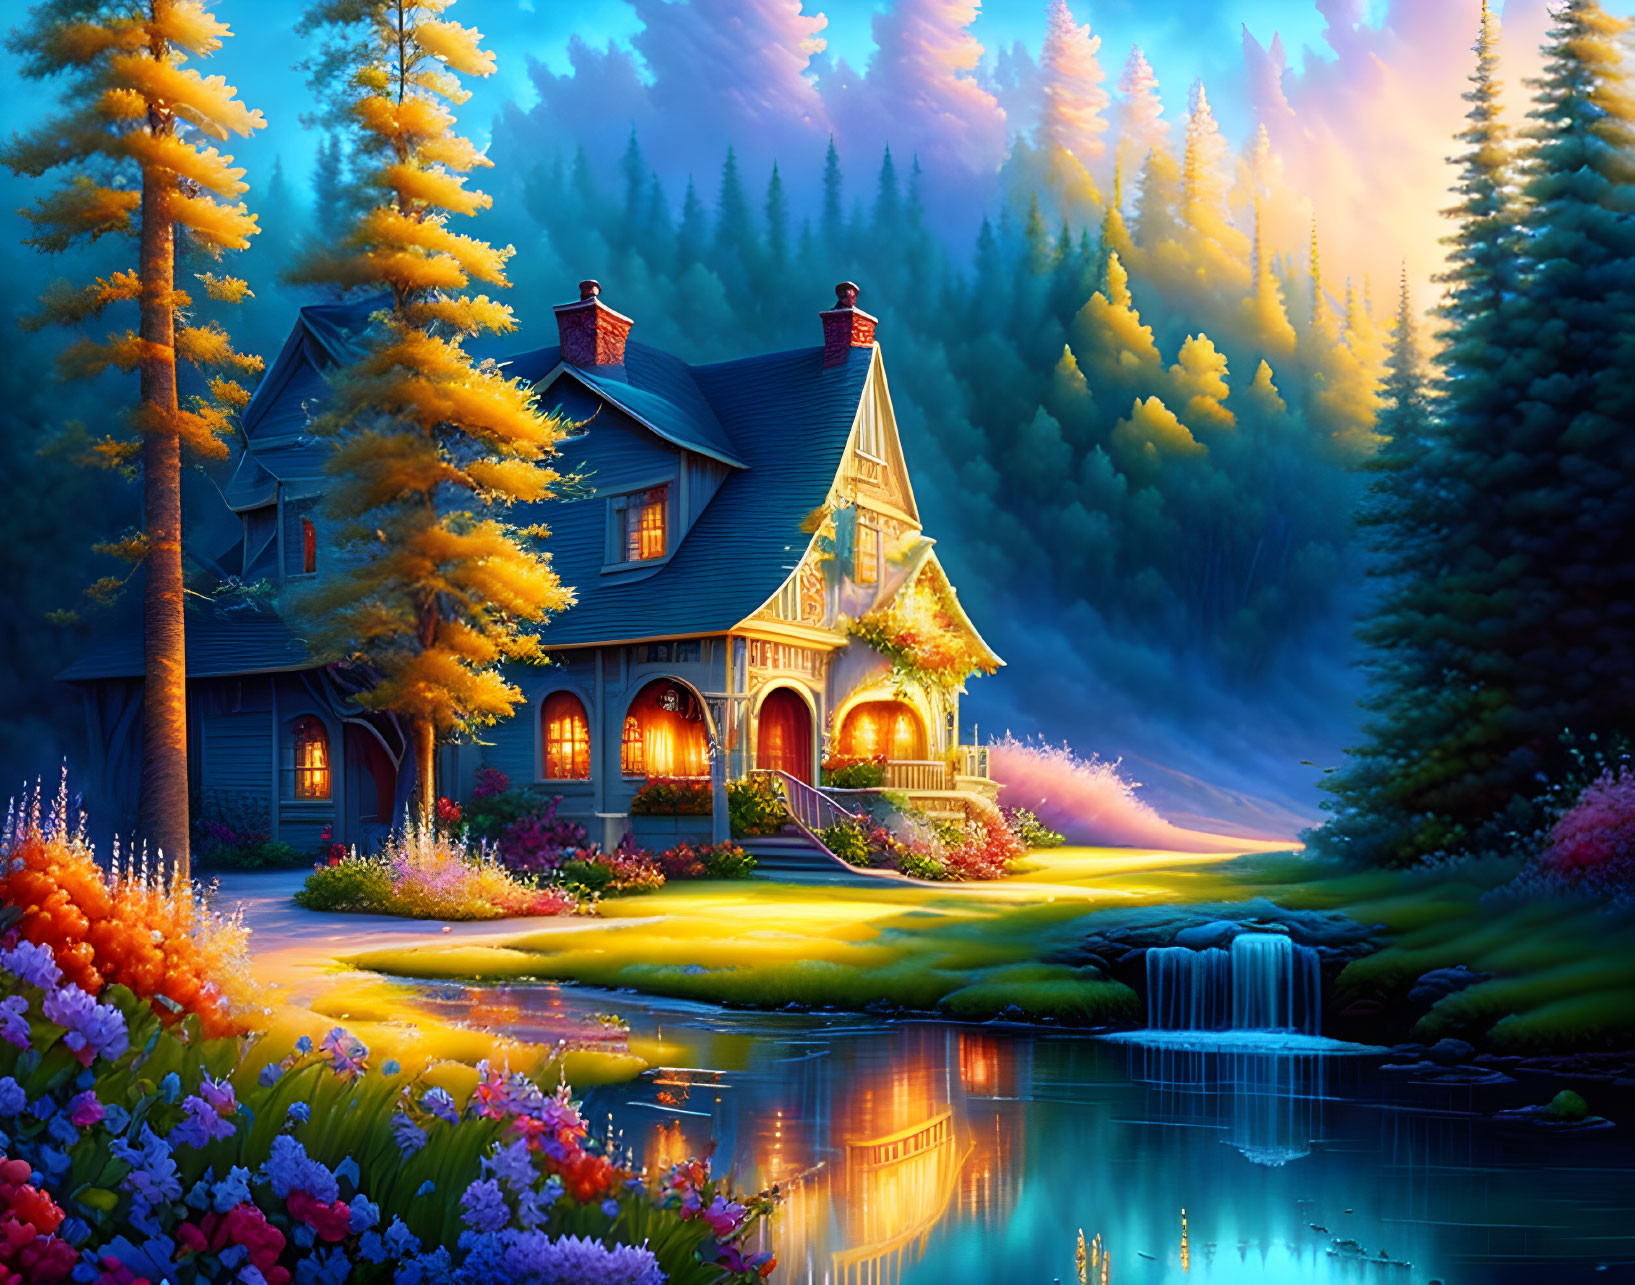 Twilight scene of house surrounded by trees, flowers, waterfall, and pond